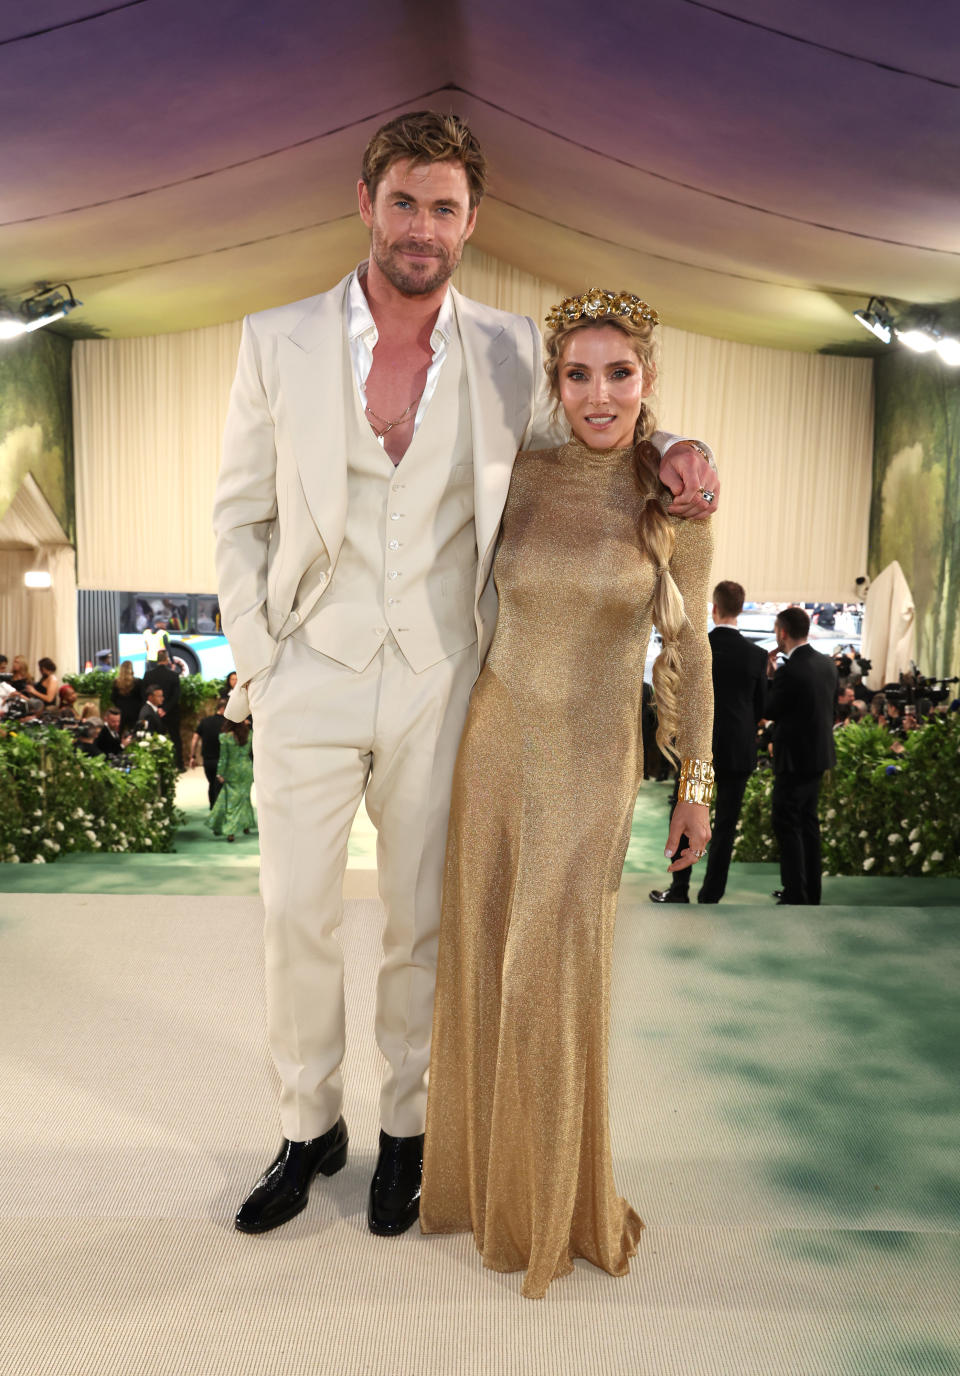 Chris Hemsworth in a white suit and black shoes stands next to Elsa Pataky wearing a golden gown and tiara